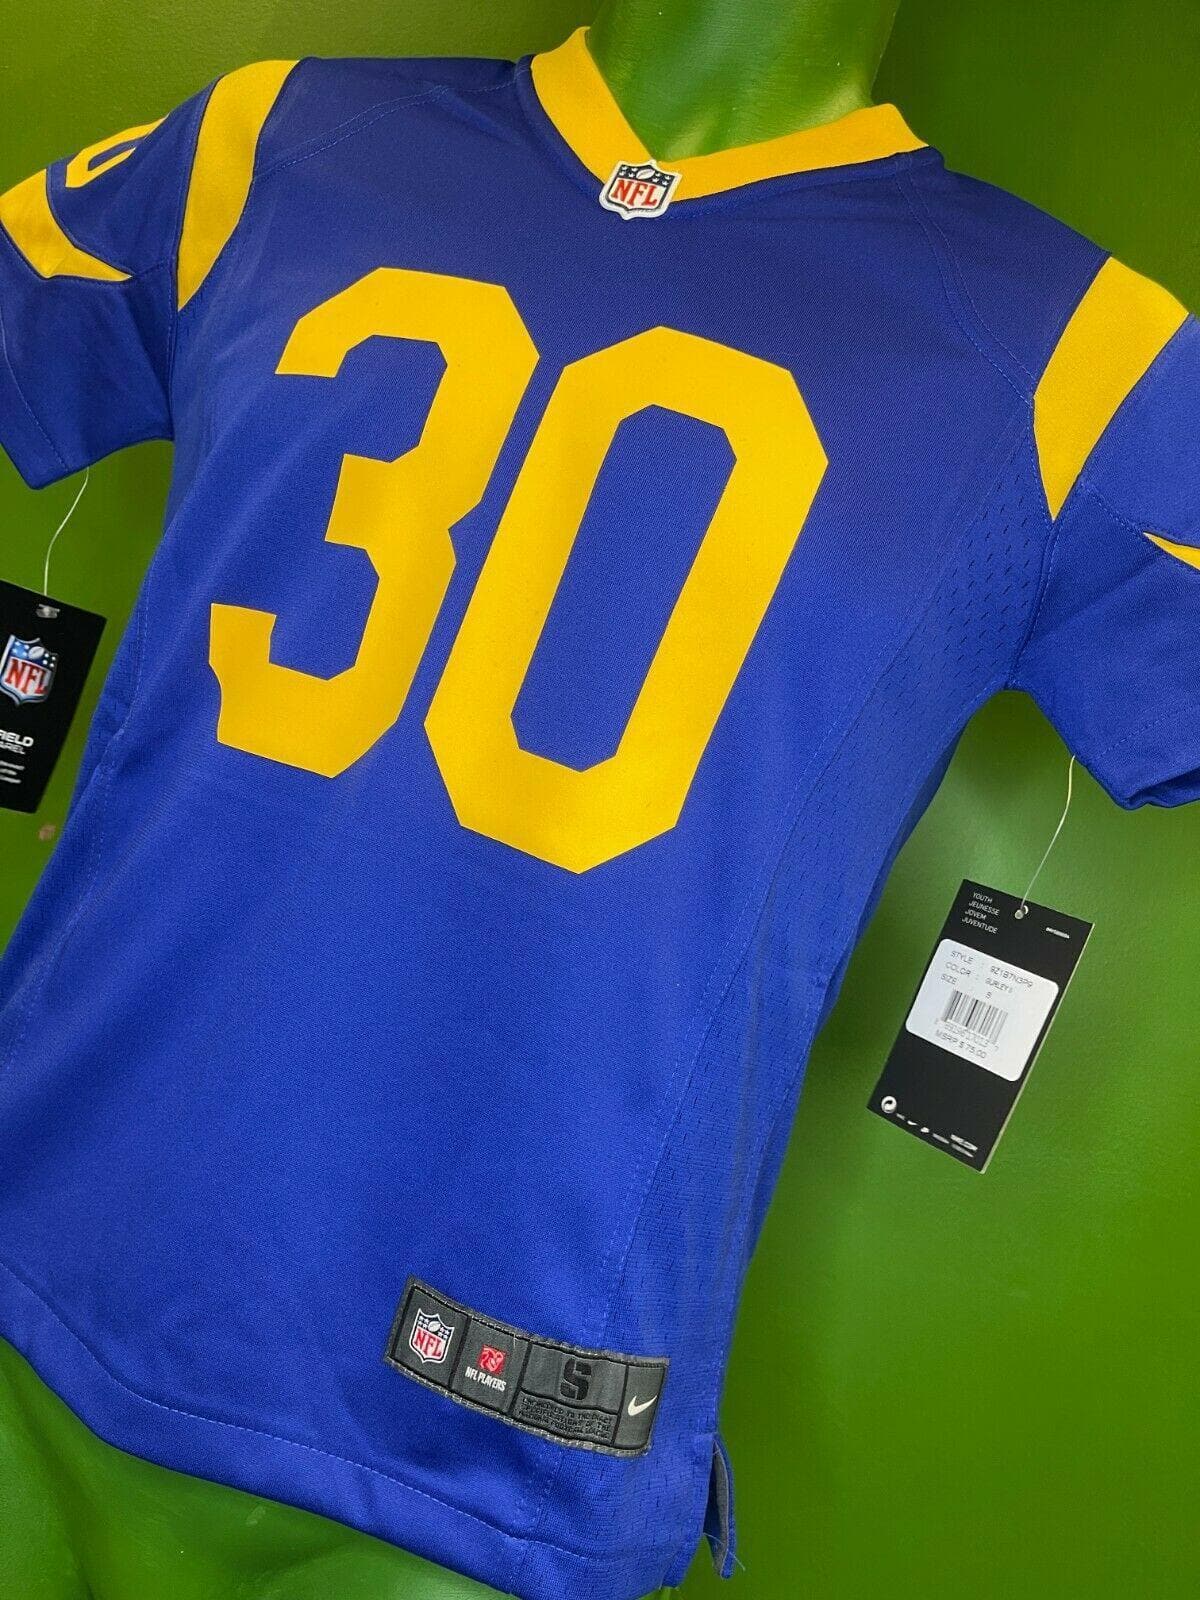 NFL Los Angeles Rams Todd Gurley #30 Game Jersey Youth Small NWT